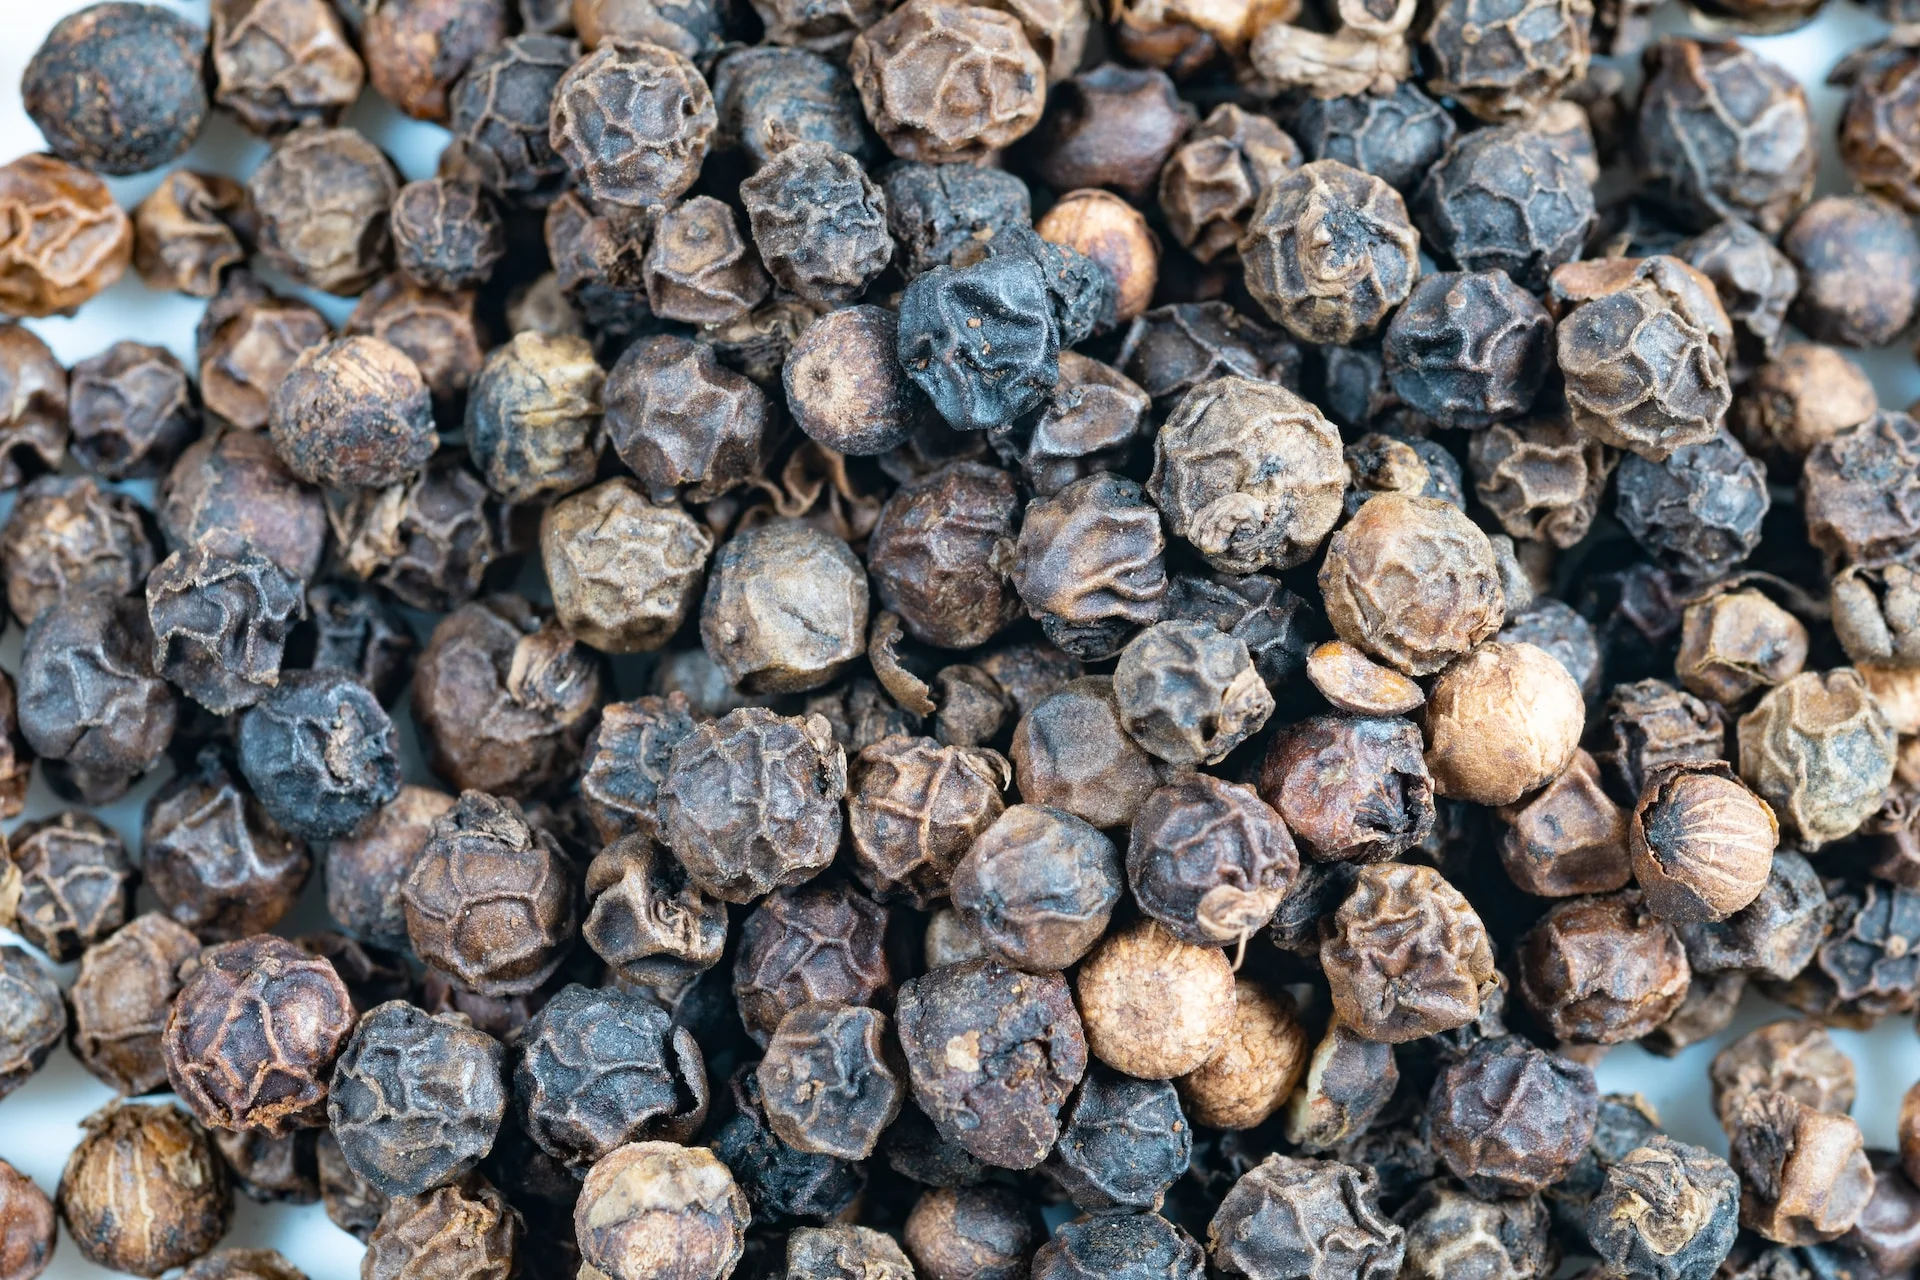 Black pepper: healthy or not?